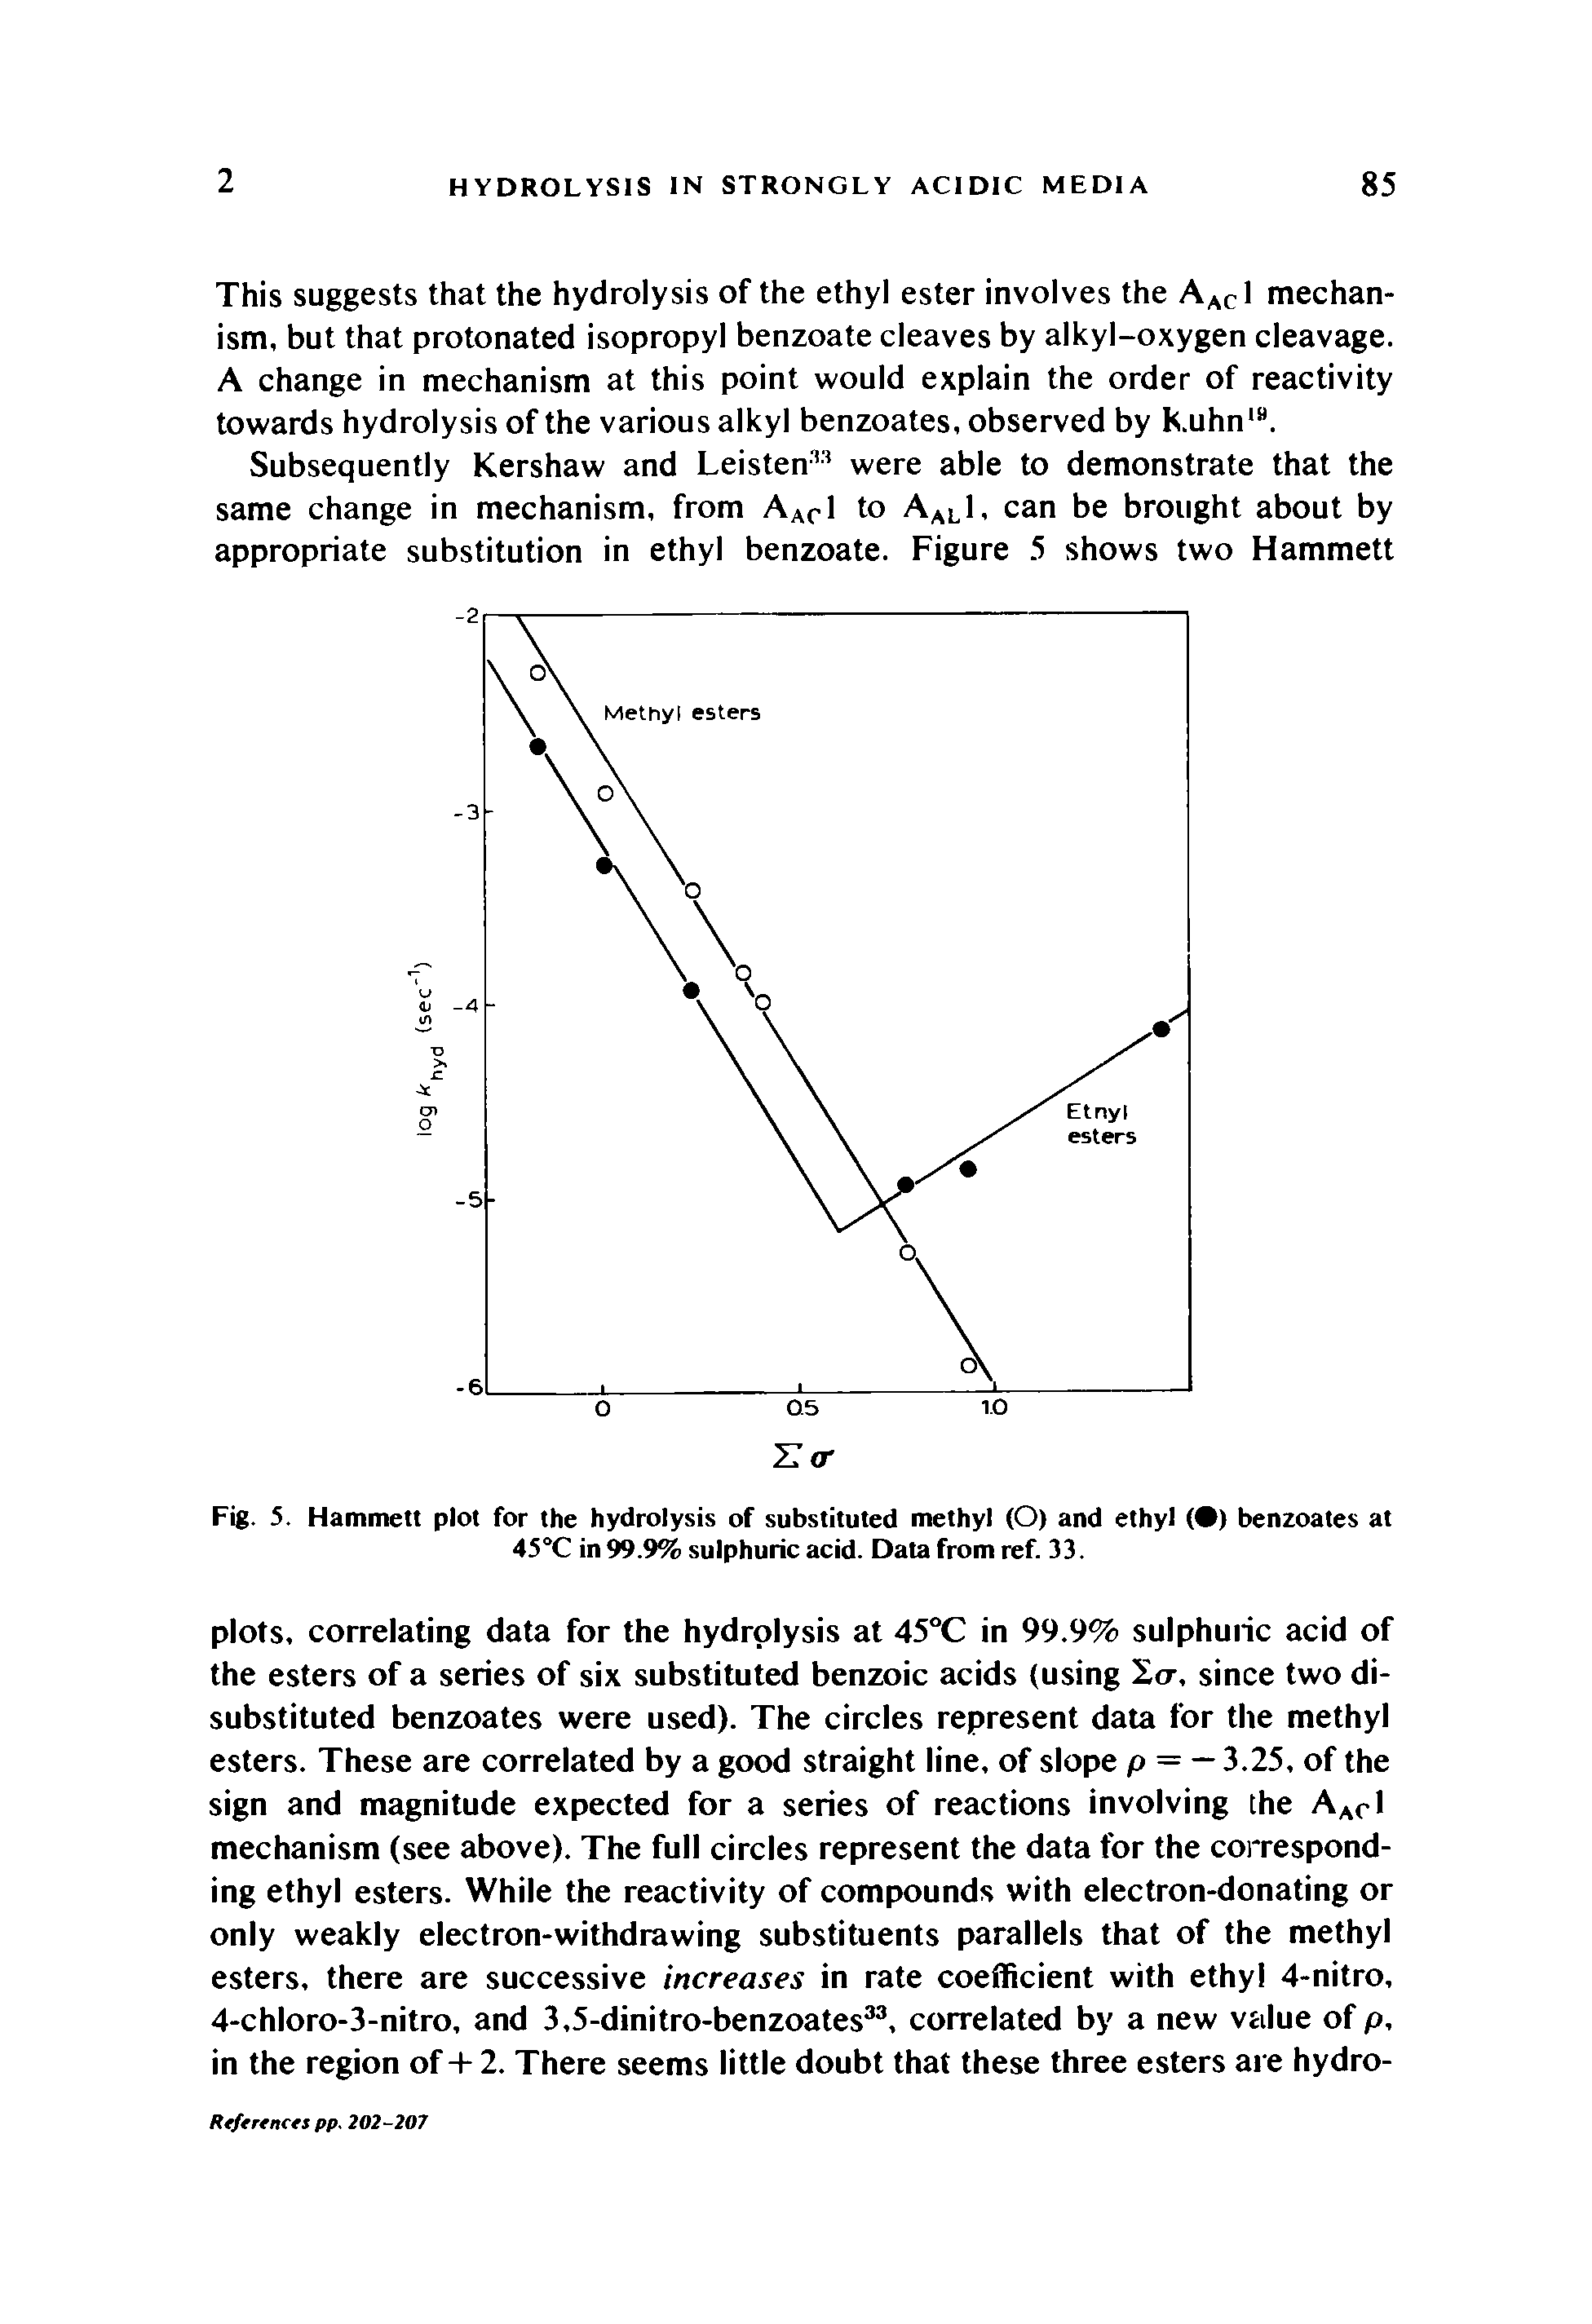 Fig. 5. Hammett plot for the hydrolysis of substituted methyl (O) and ethyl ( ) benzoates at 45°C in 99.9% sulphuric acid. Data from ref. 33.